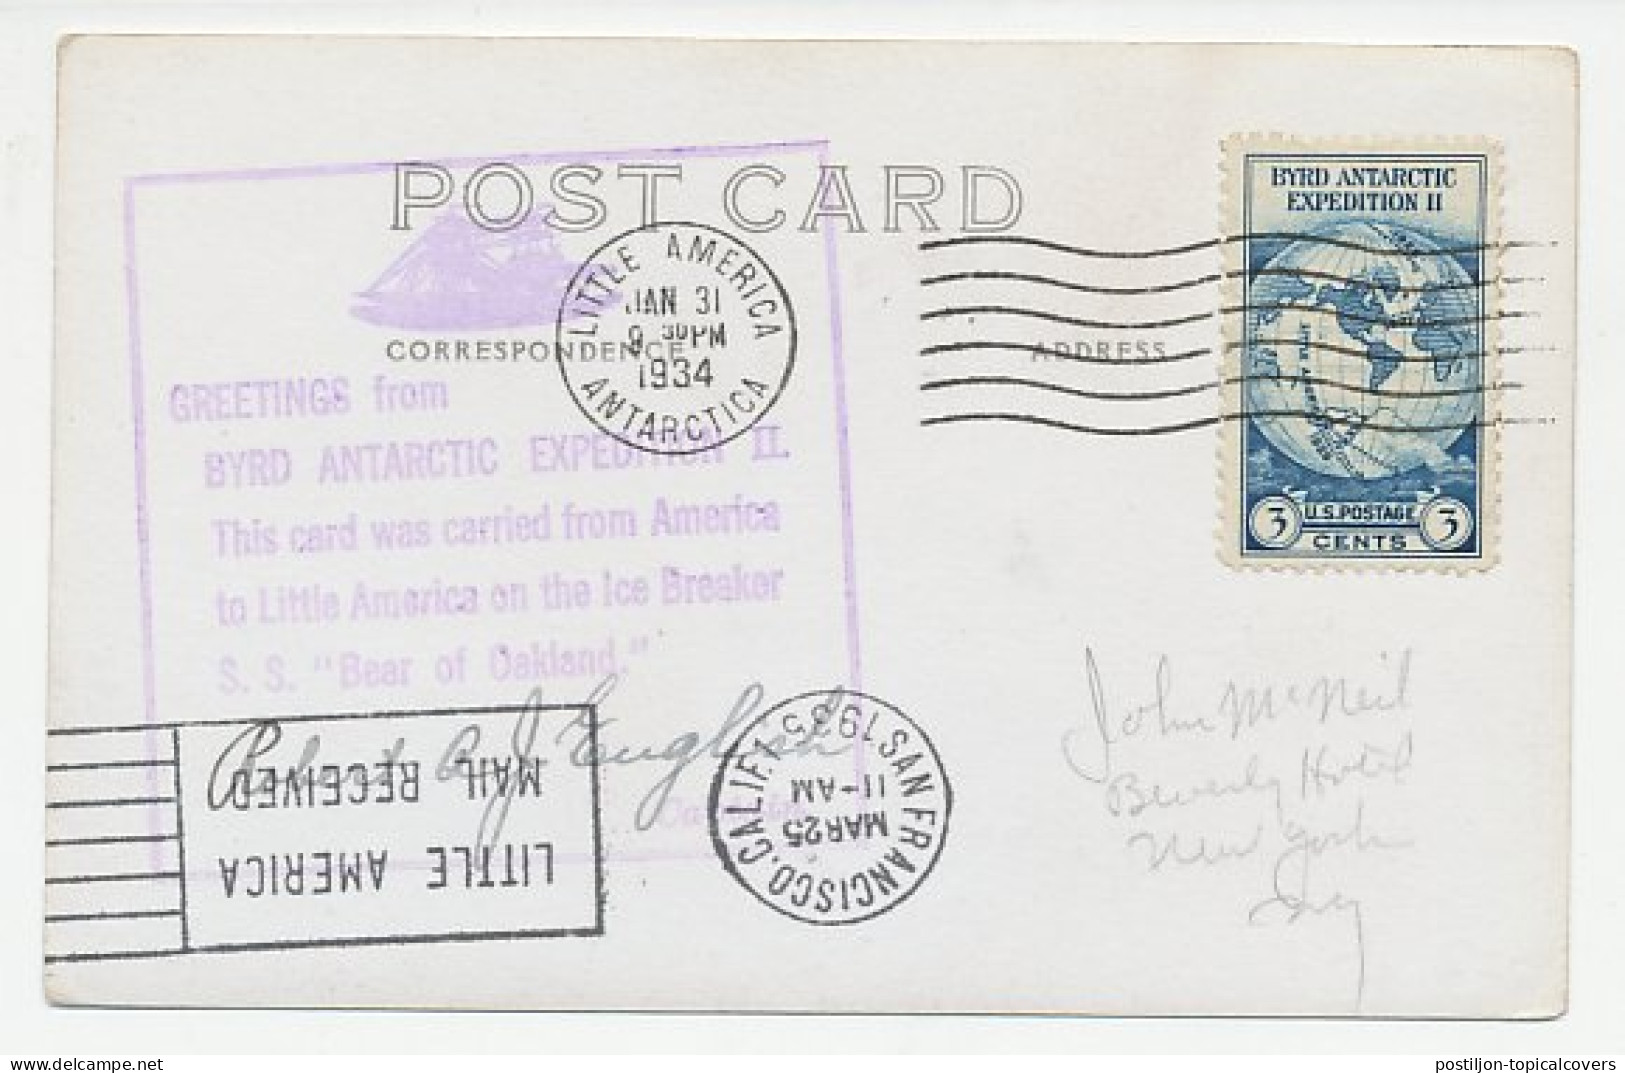 Card / Postmark USA 1934 Byrd Antarctic Expedition II - Photo Postcard Whale - Arctische Expedities